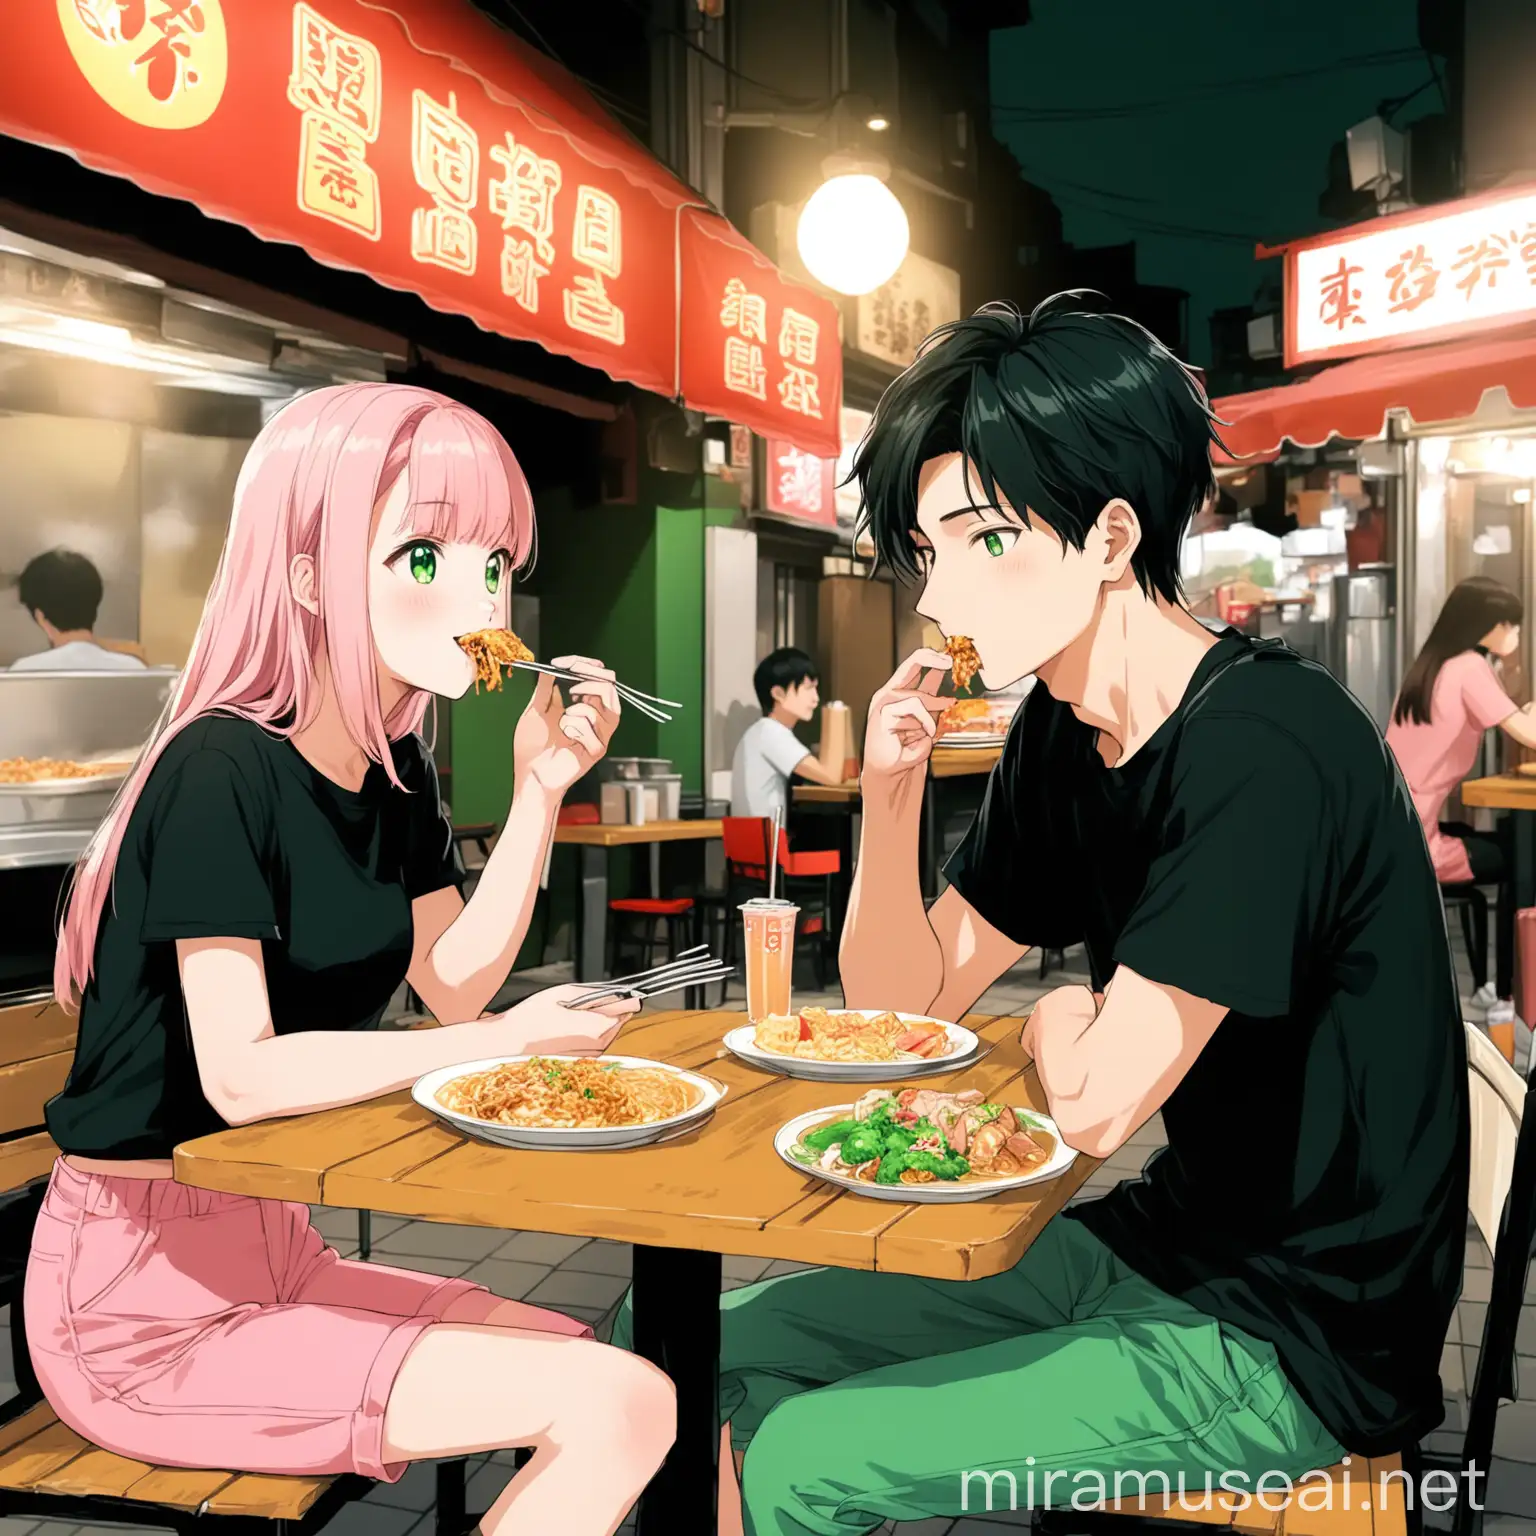 A 20-year-old handsome man in a green short-sleeved shirt and a 20-year-old beauty in a black short-sleeved shirt and pink long pants are sitting at a street restaurant in Taiwan. There is delicious food on the table.